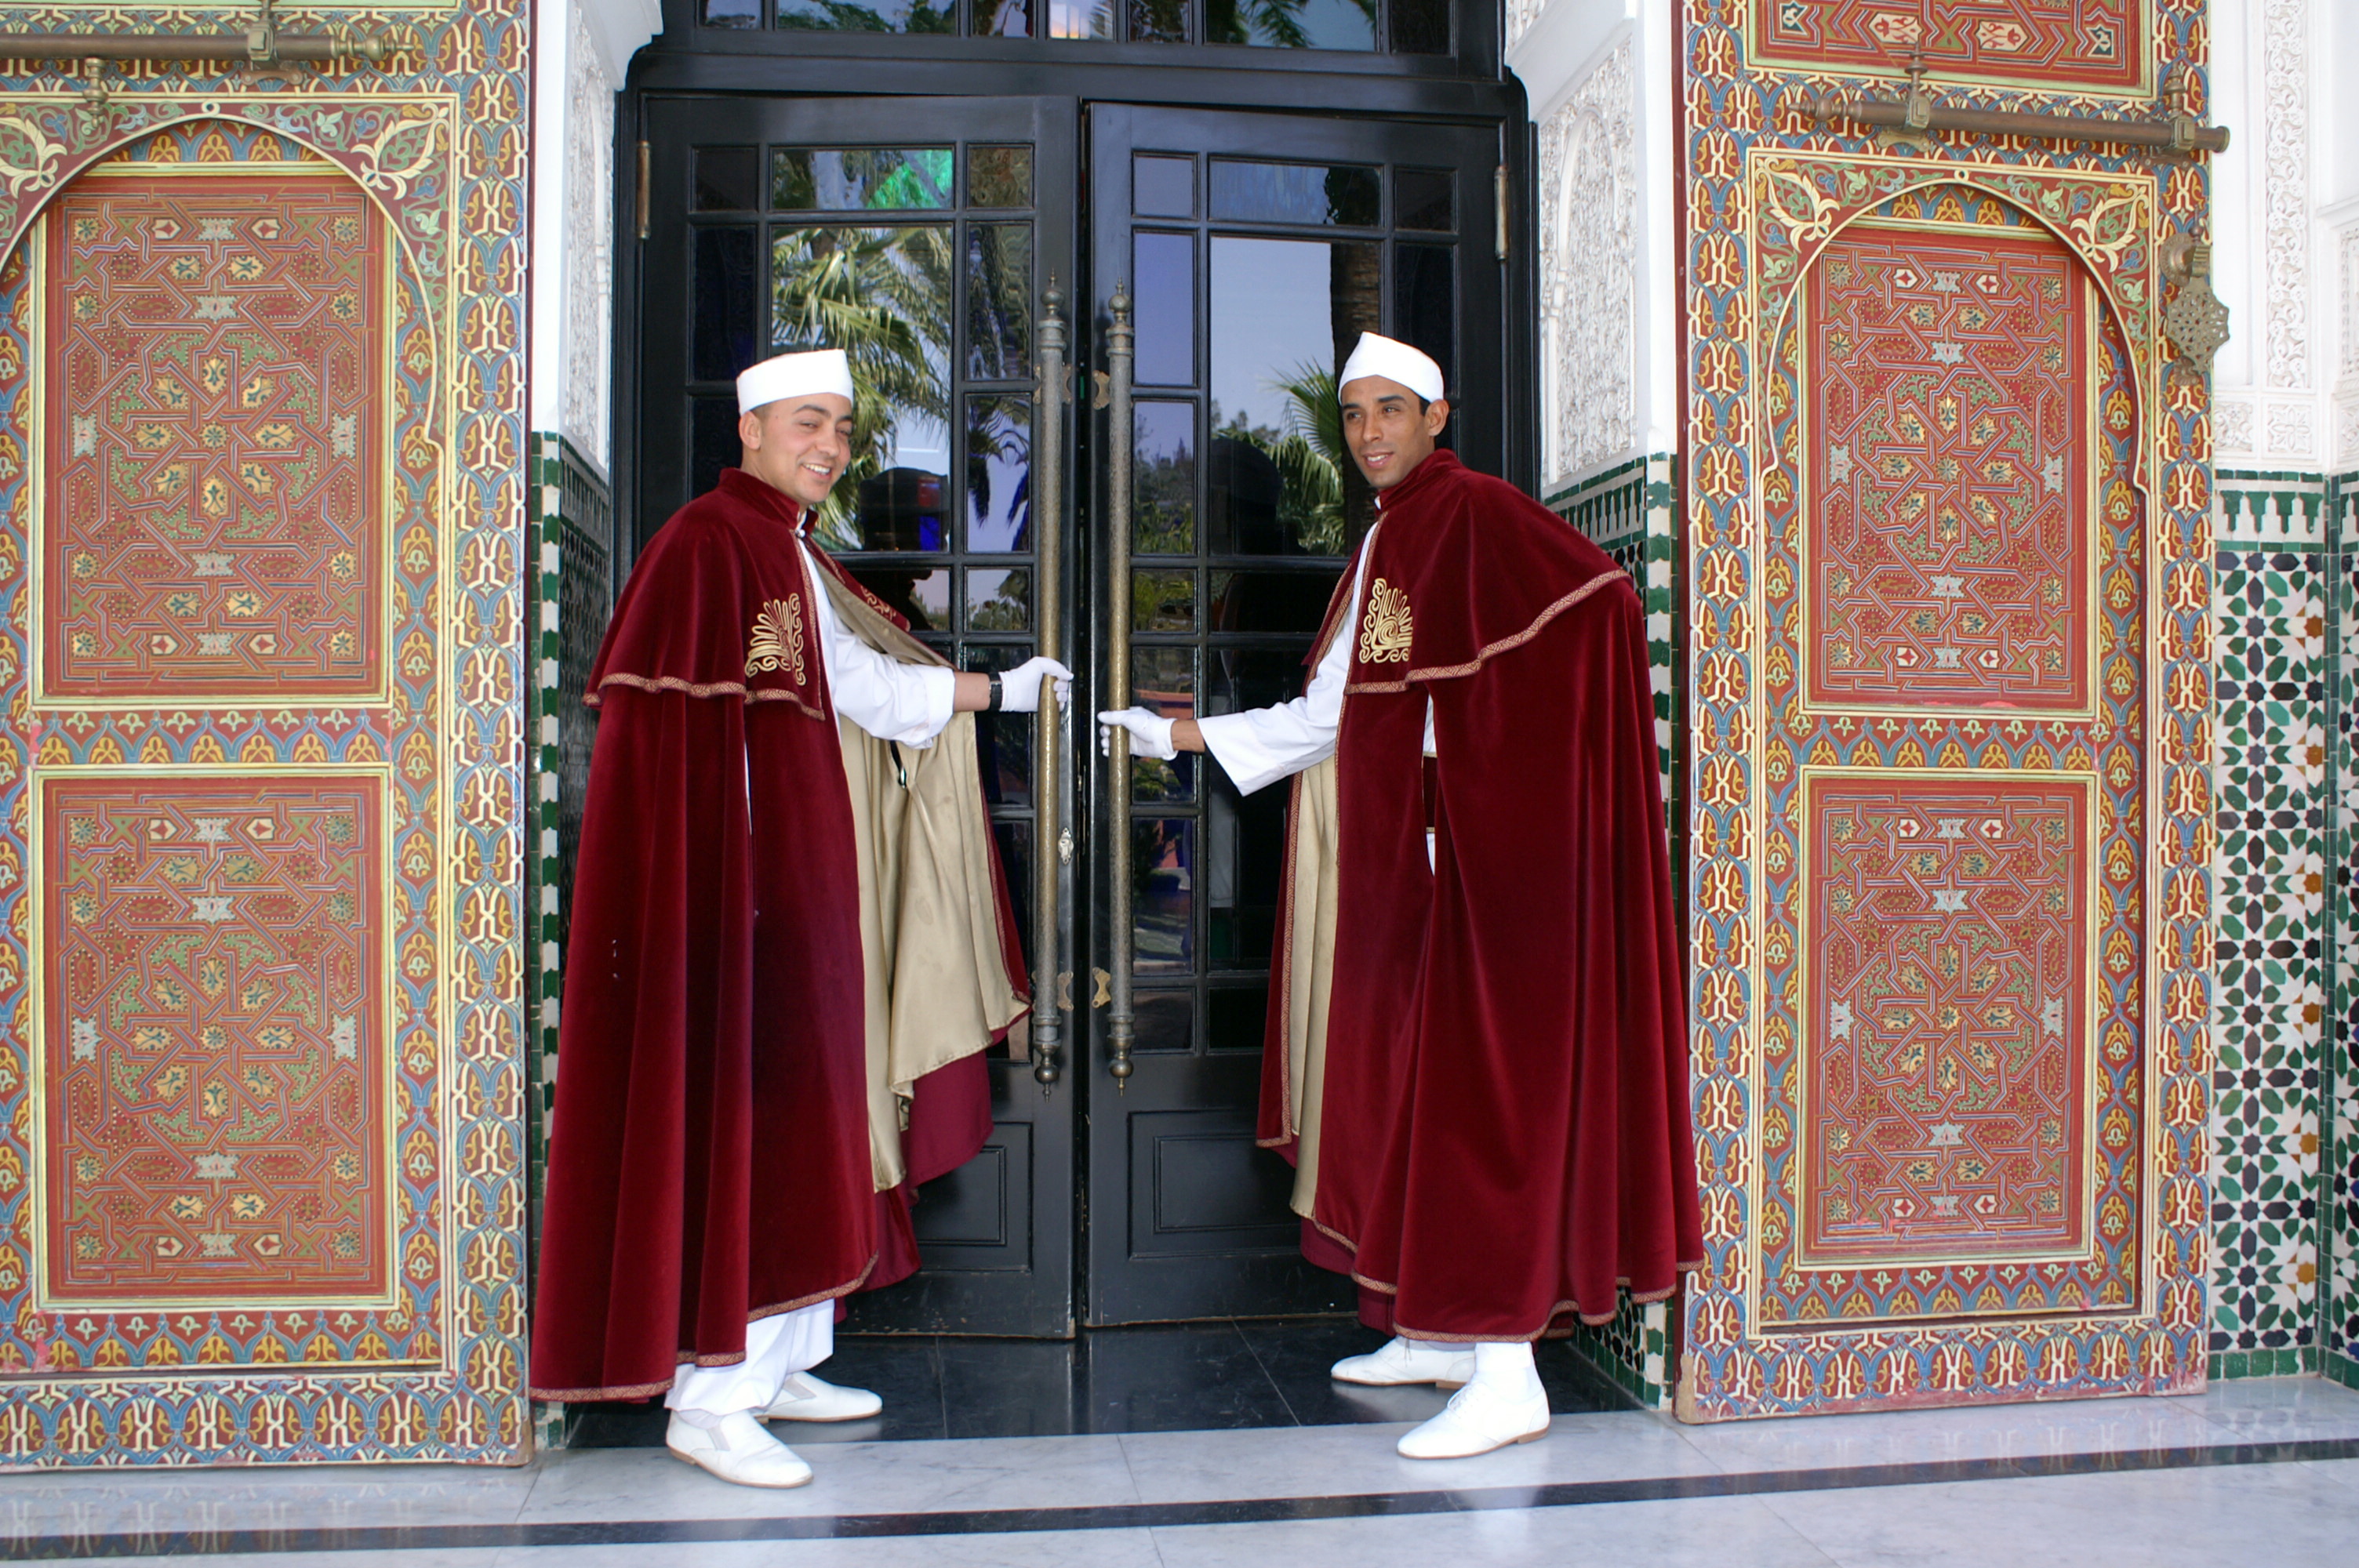 Two out of four doormen about to open the doors